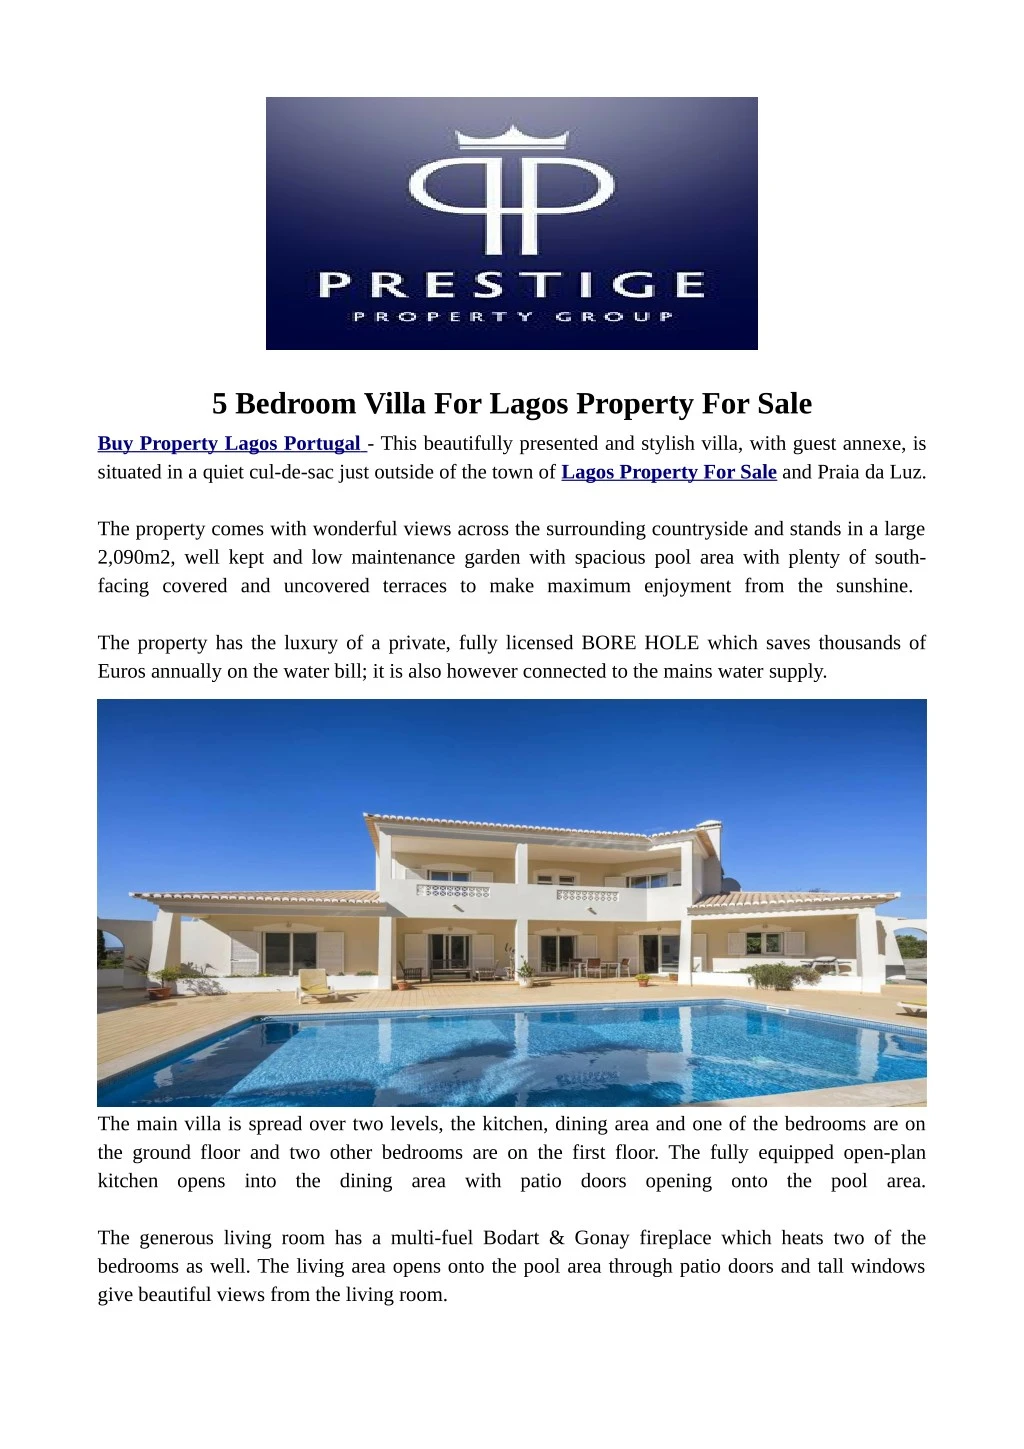 5 bedroom villa for lagos property for sale